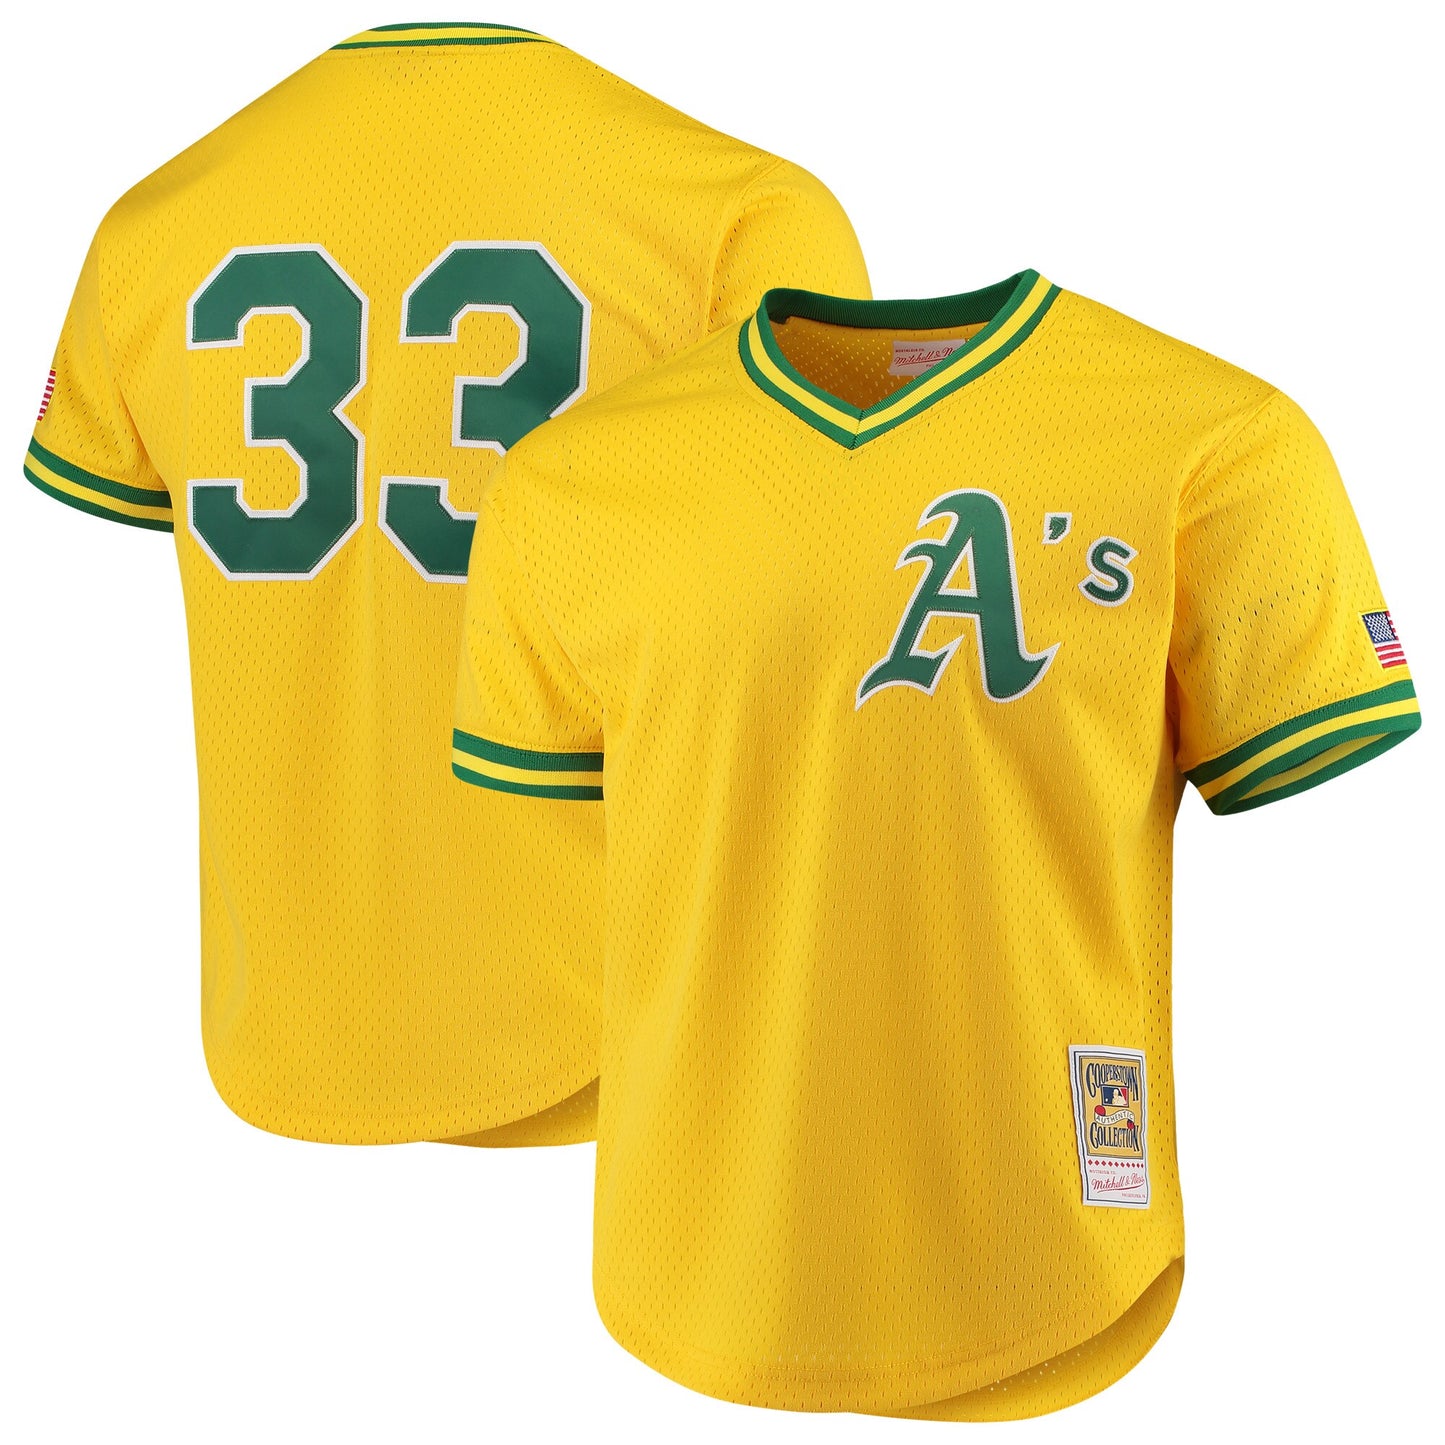 Jose Canseco Oakland Athletics Mitchell & Ness Cooperstown Collection Mesh Batting Practice Jersey - Gold